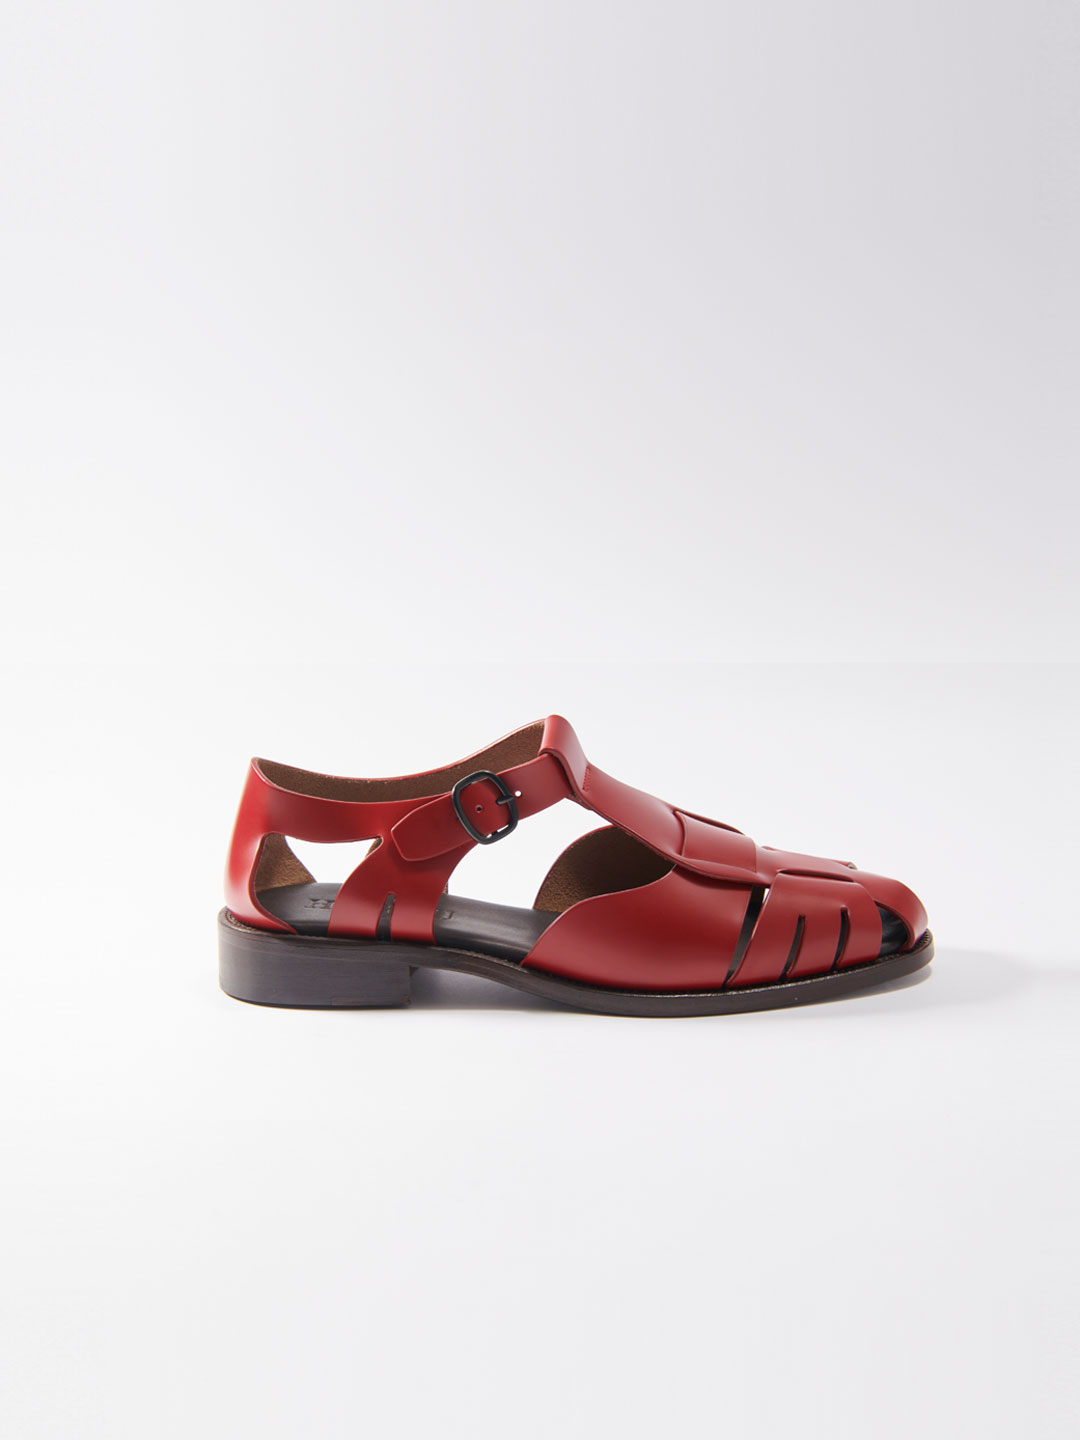 Pesca Fisherman Sandals - Red